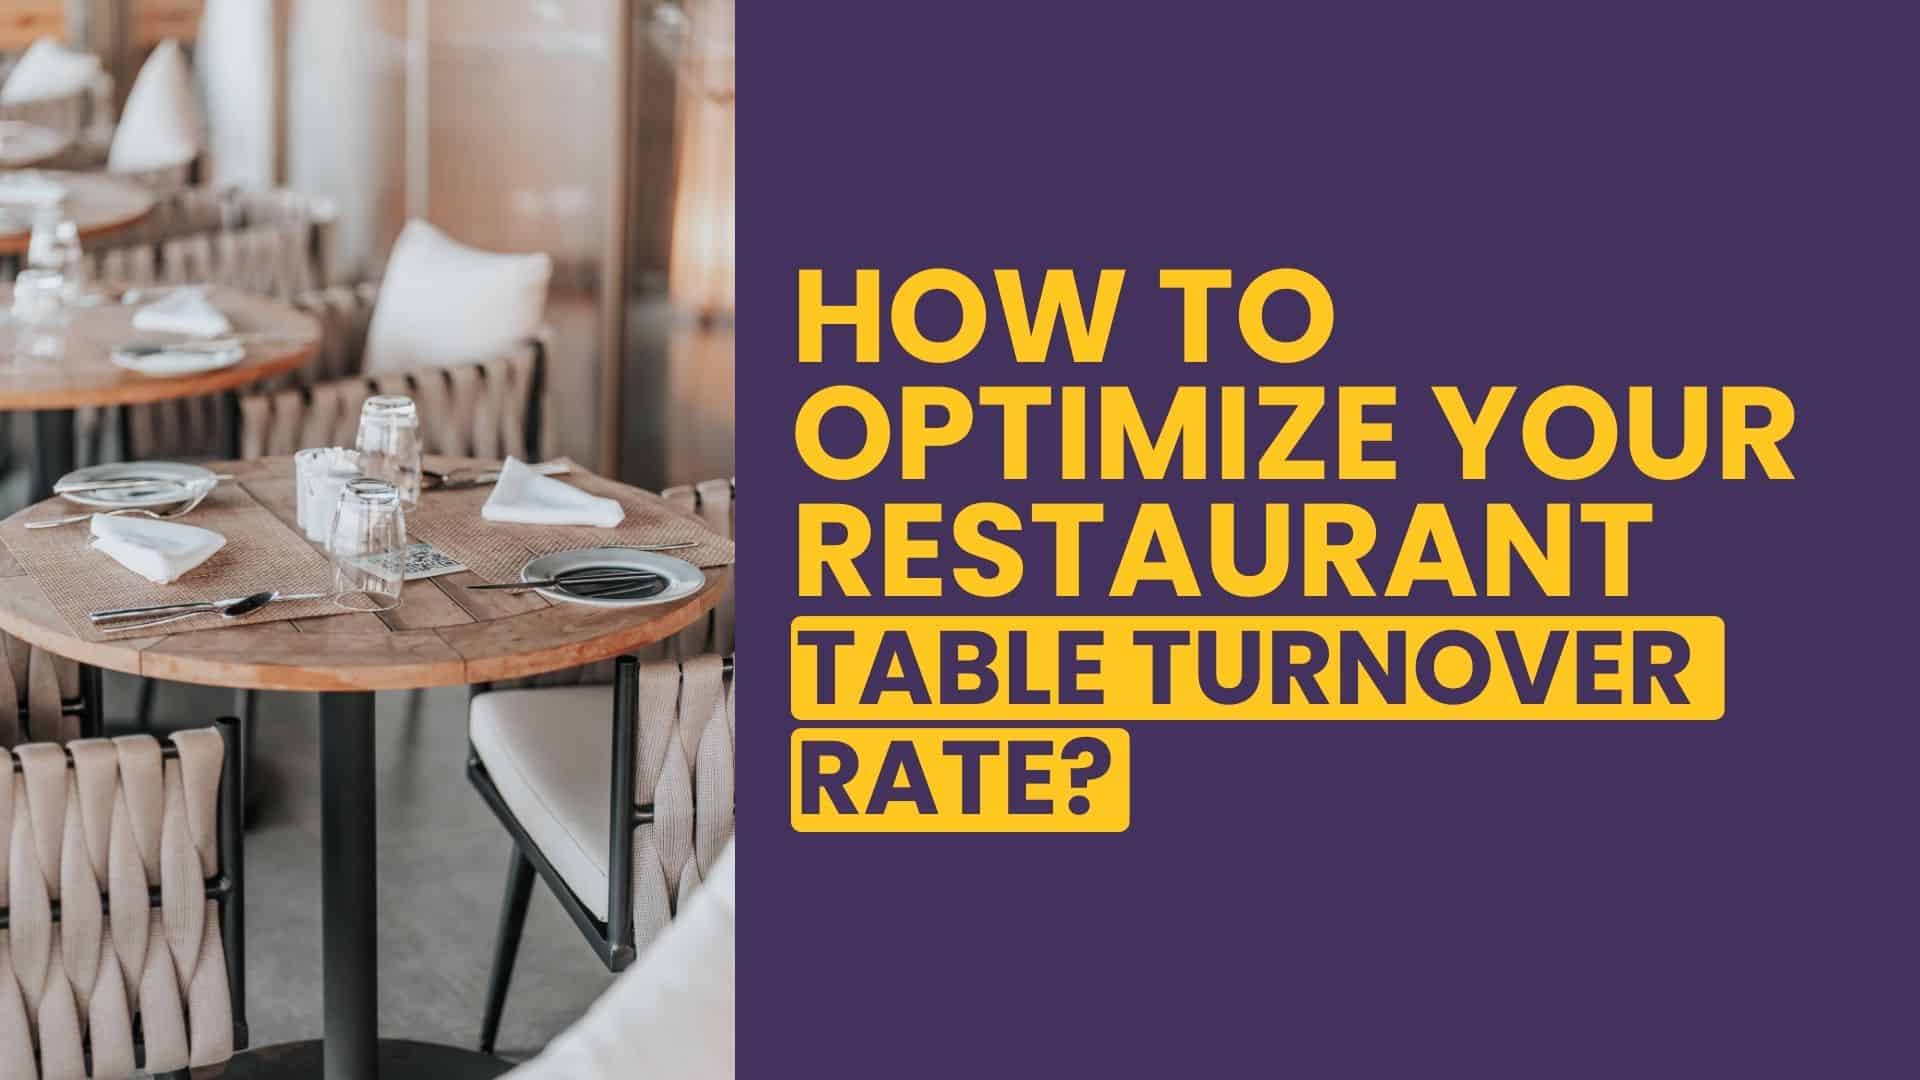 How to optimize your restaurant table turnover rate?